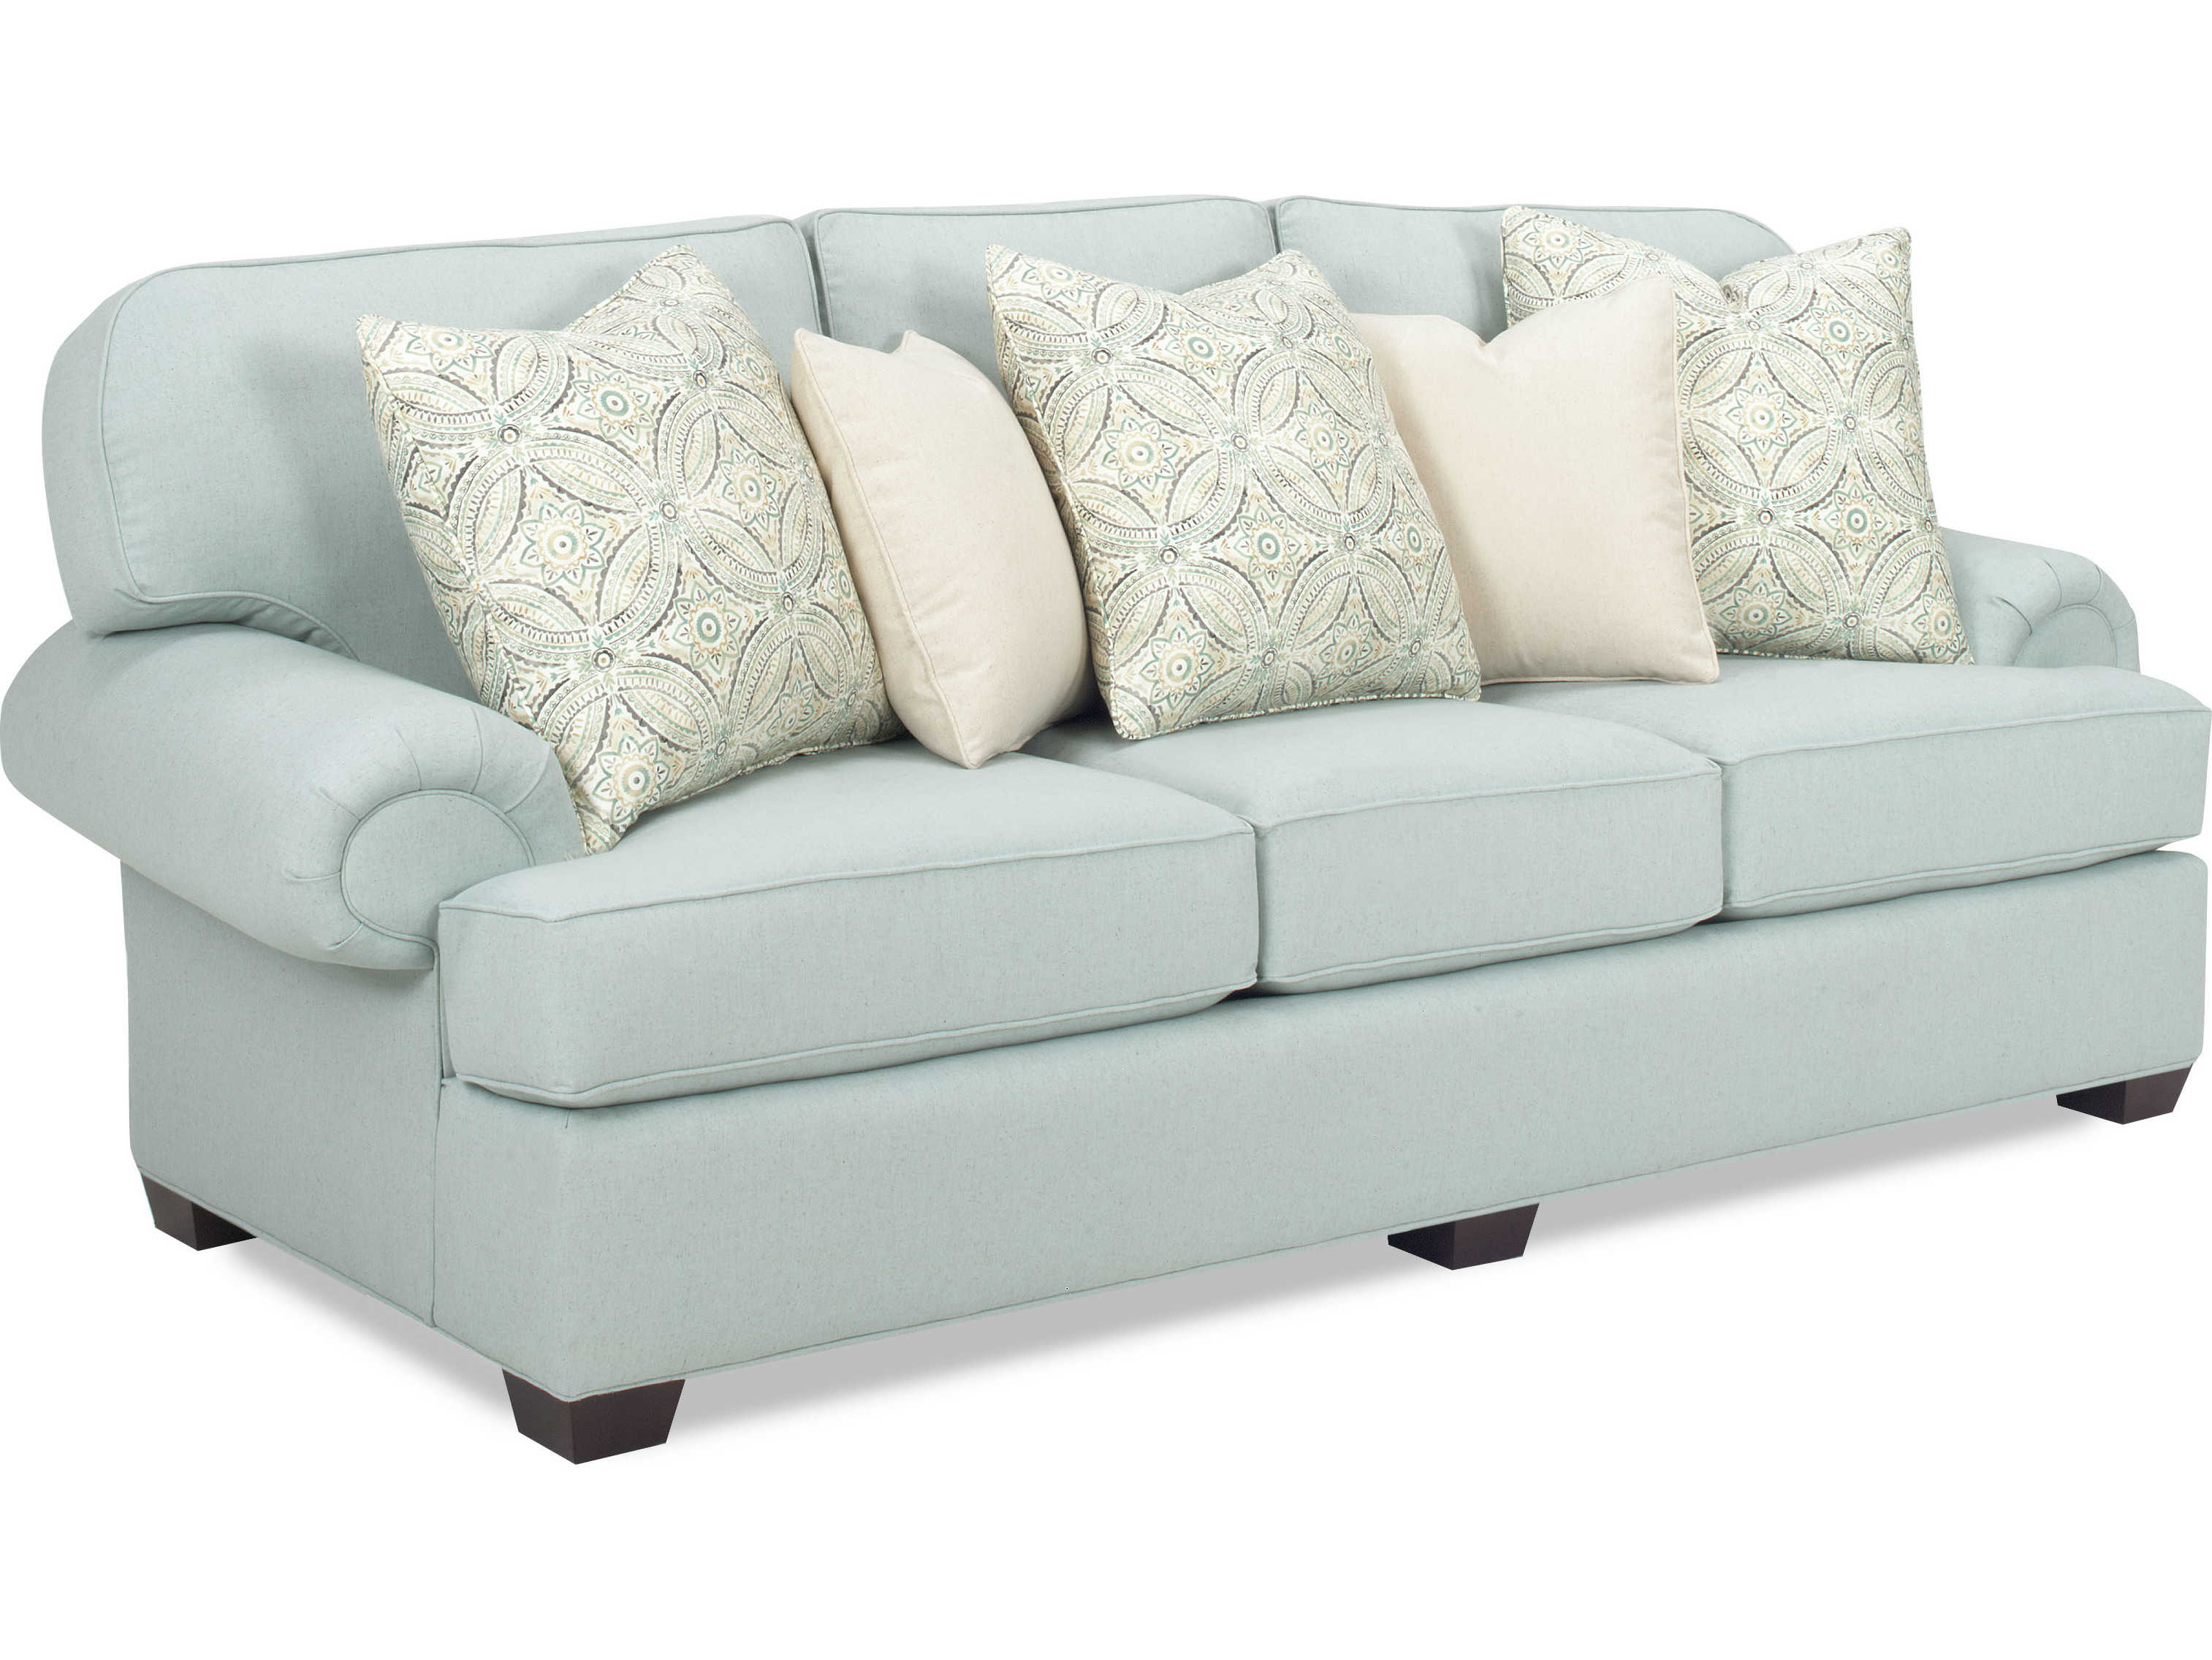 cute comfty living room couch